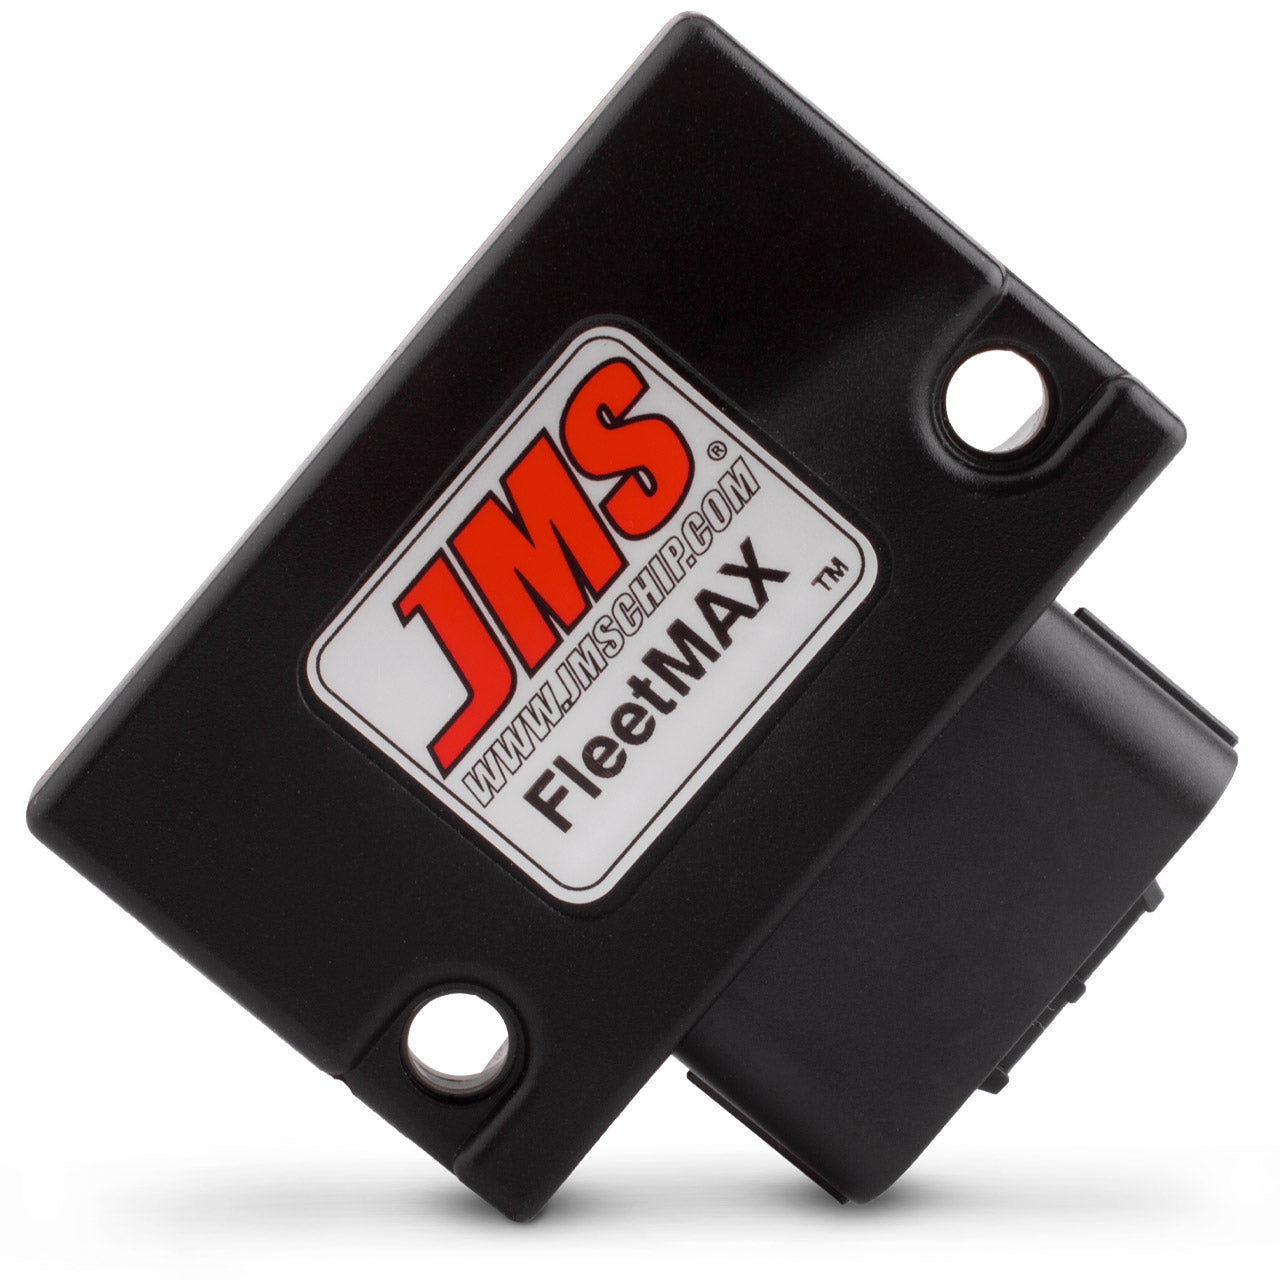 JMS FleetMAX Speed Control Device. Plug and Play for some 2009 - 2021 Nissan Vehicles with electronic throttle control FX71219NSV3